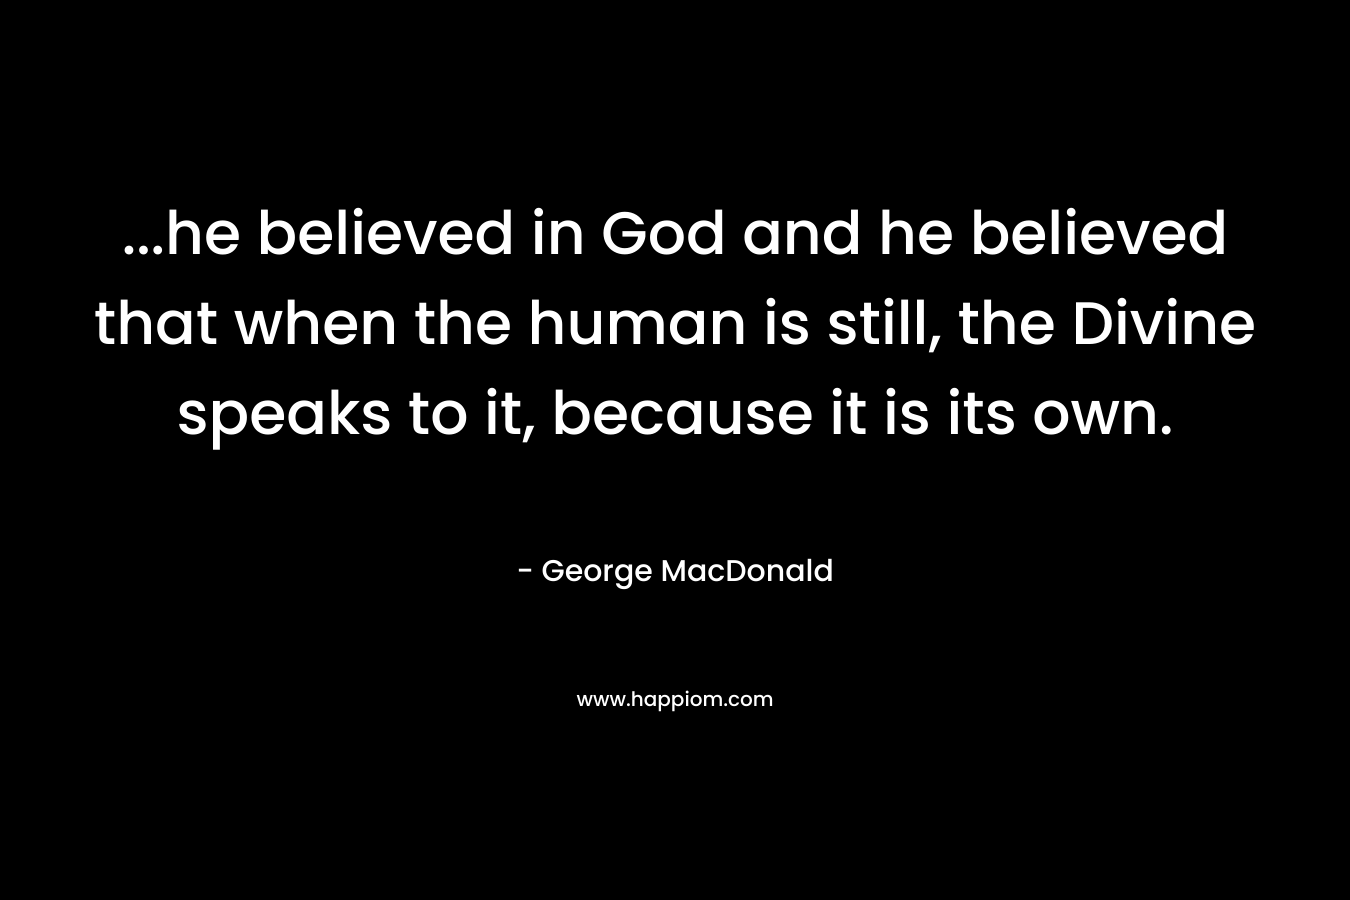 ...he believed in God and he believed that when the human is still, the Divine speaks to it, because it is its own.